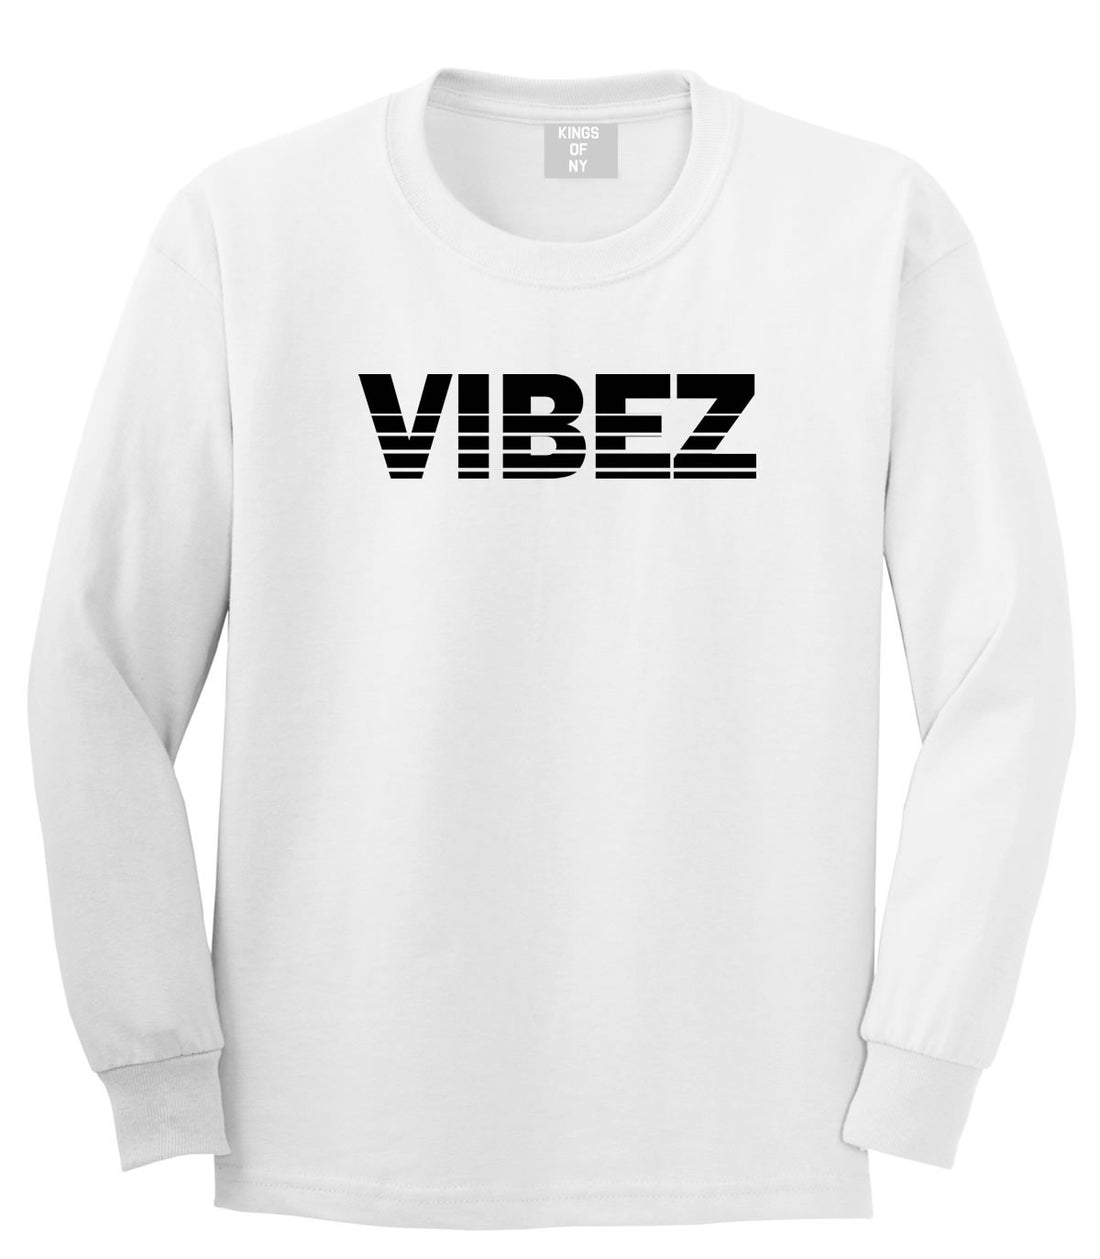 VIBEZ Racing Style Long Sleeve T-Shirt in White by Kings Of NY